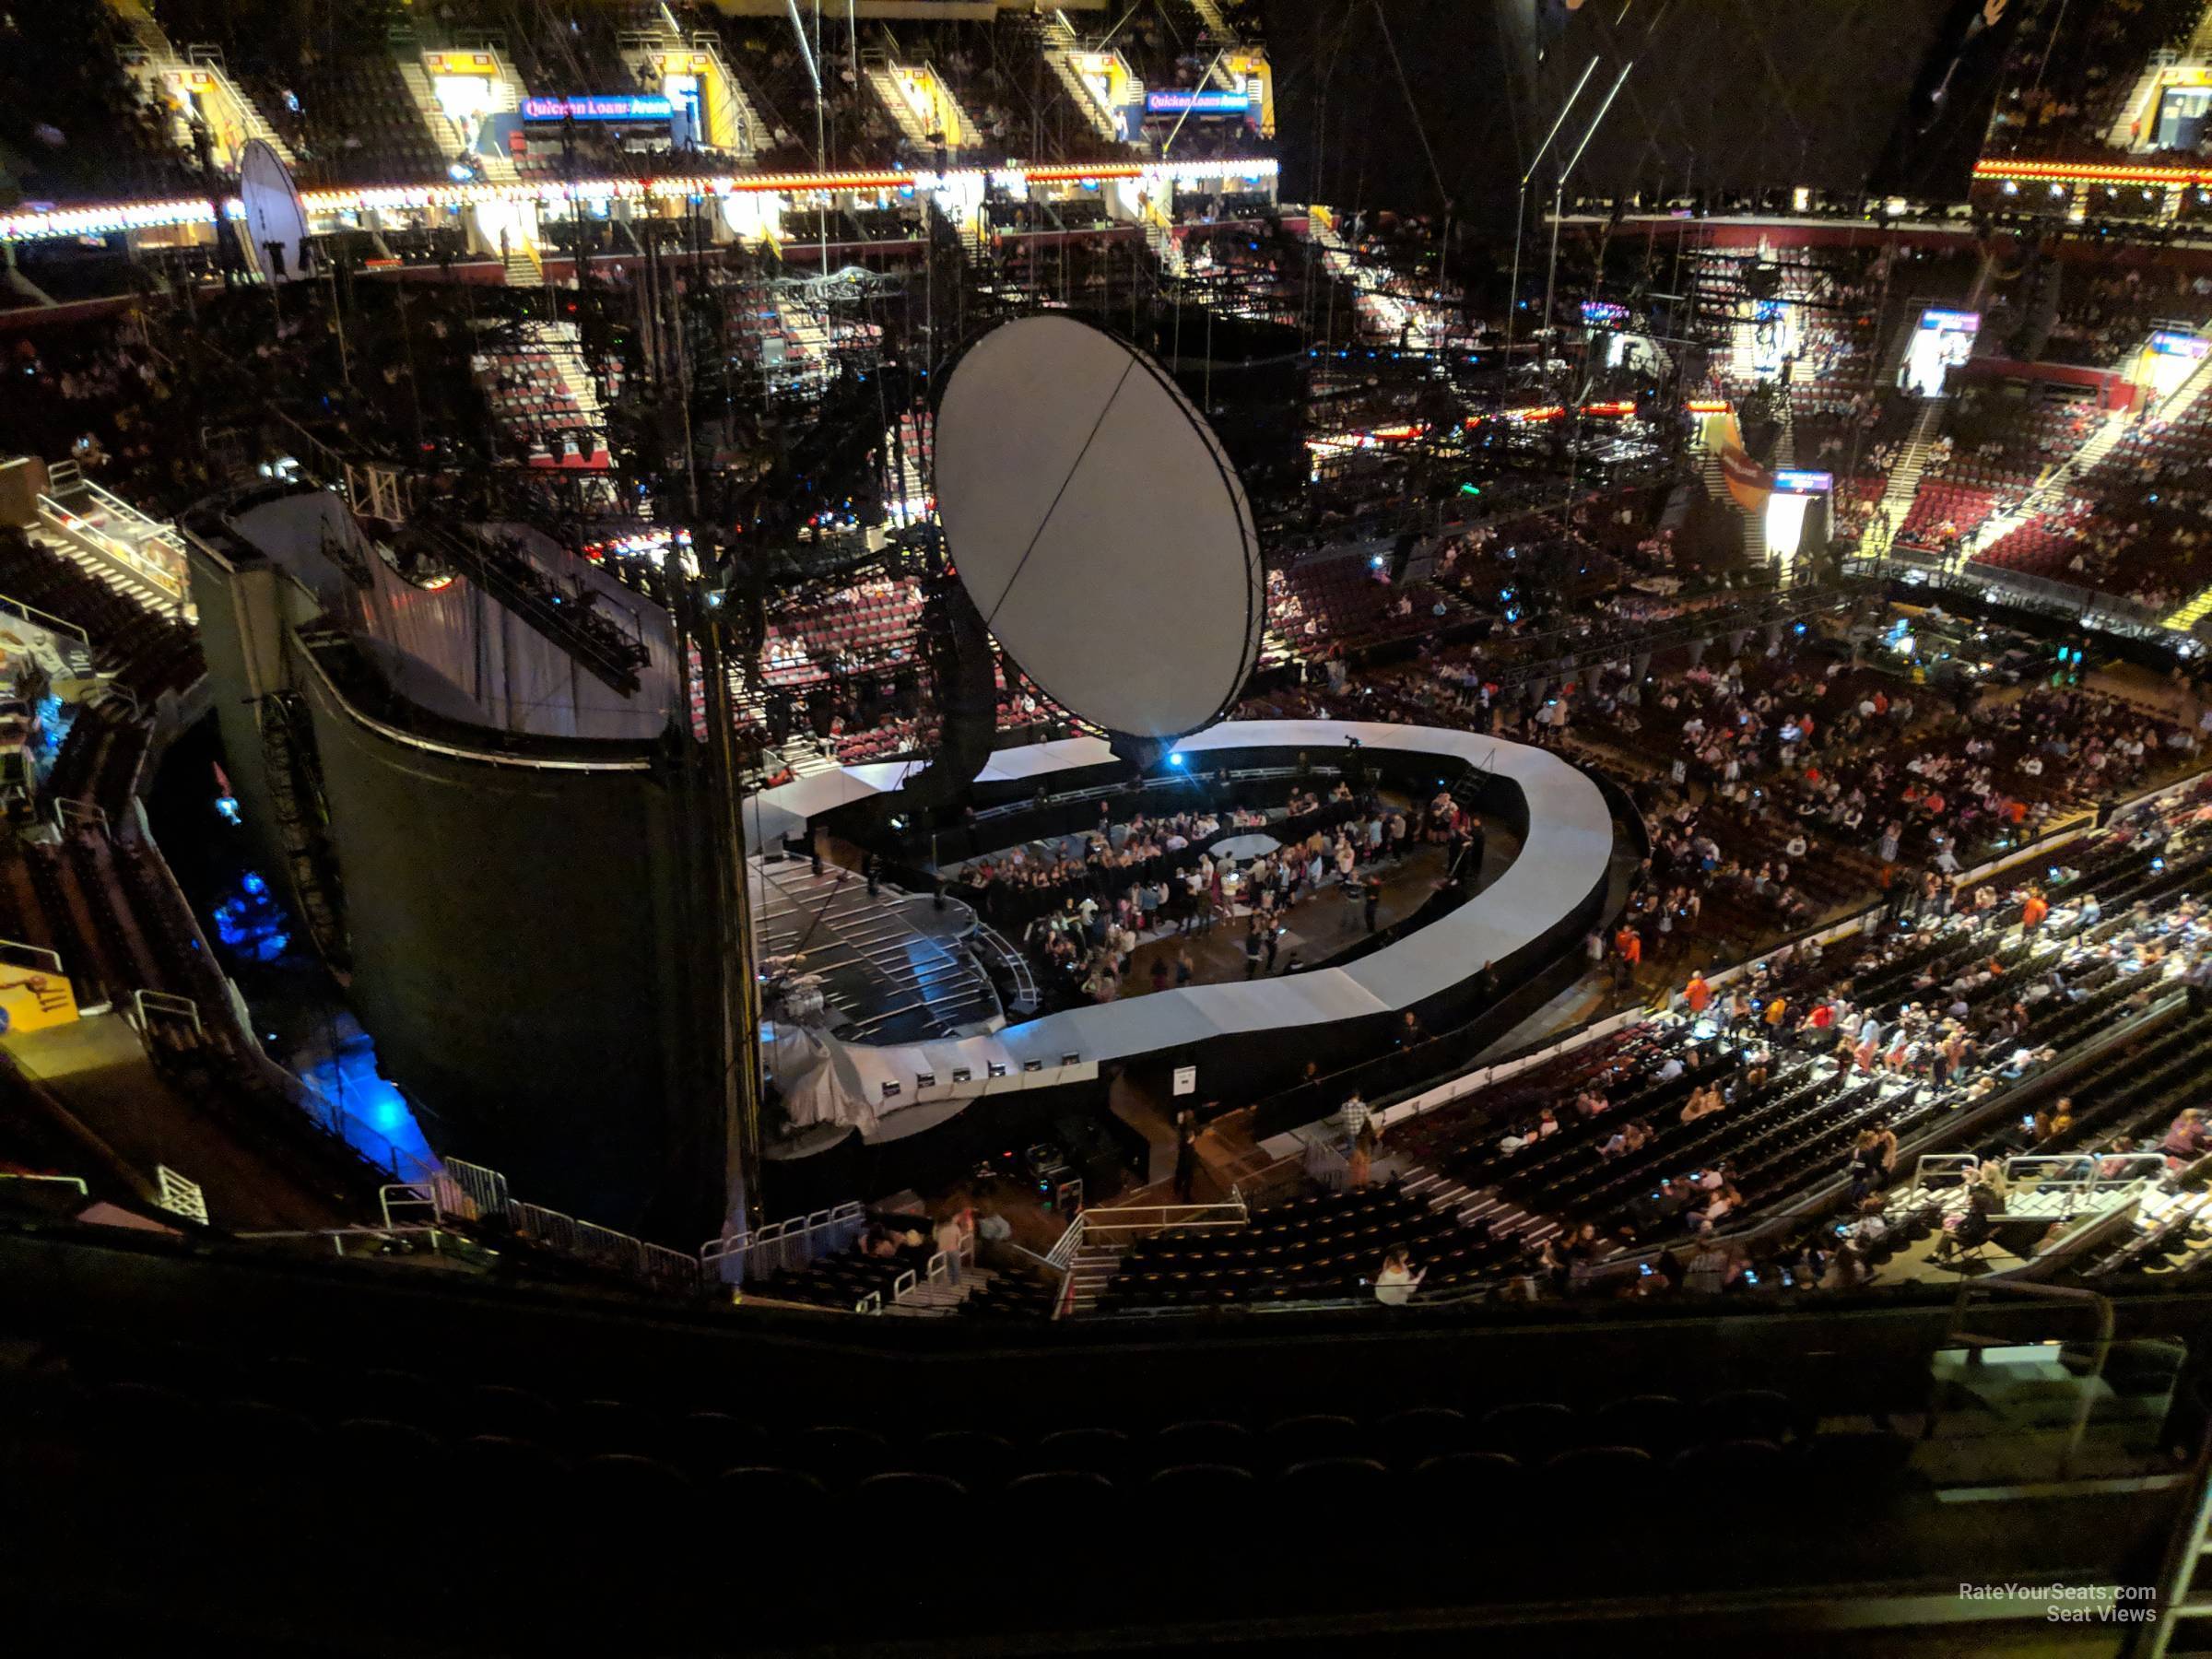 section 214, row 7 seat view  for concert - rocket mortgage fieldhouse